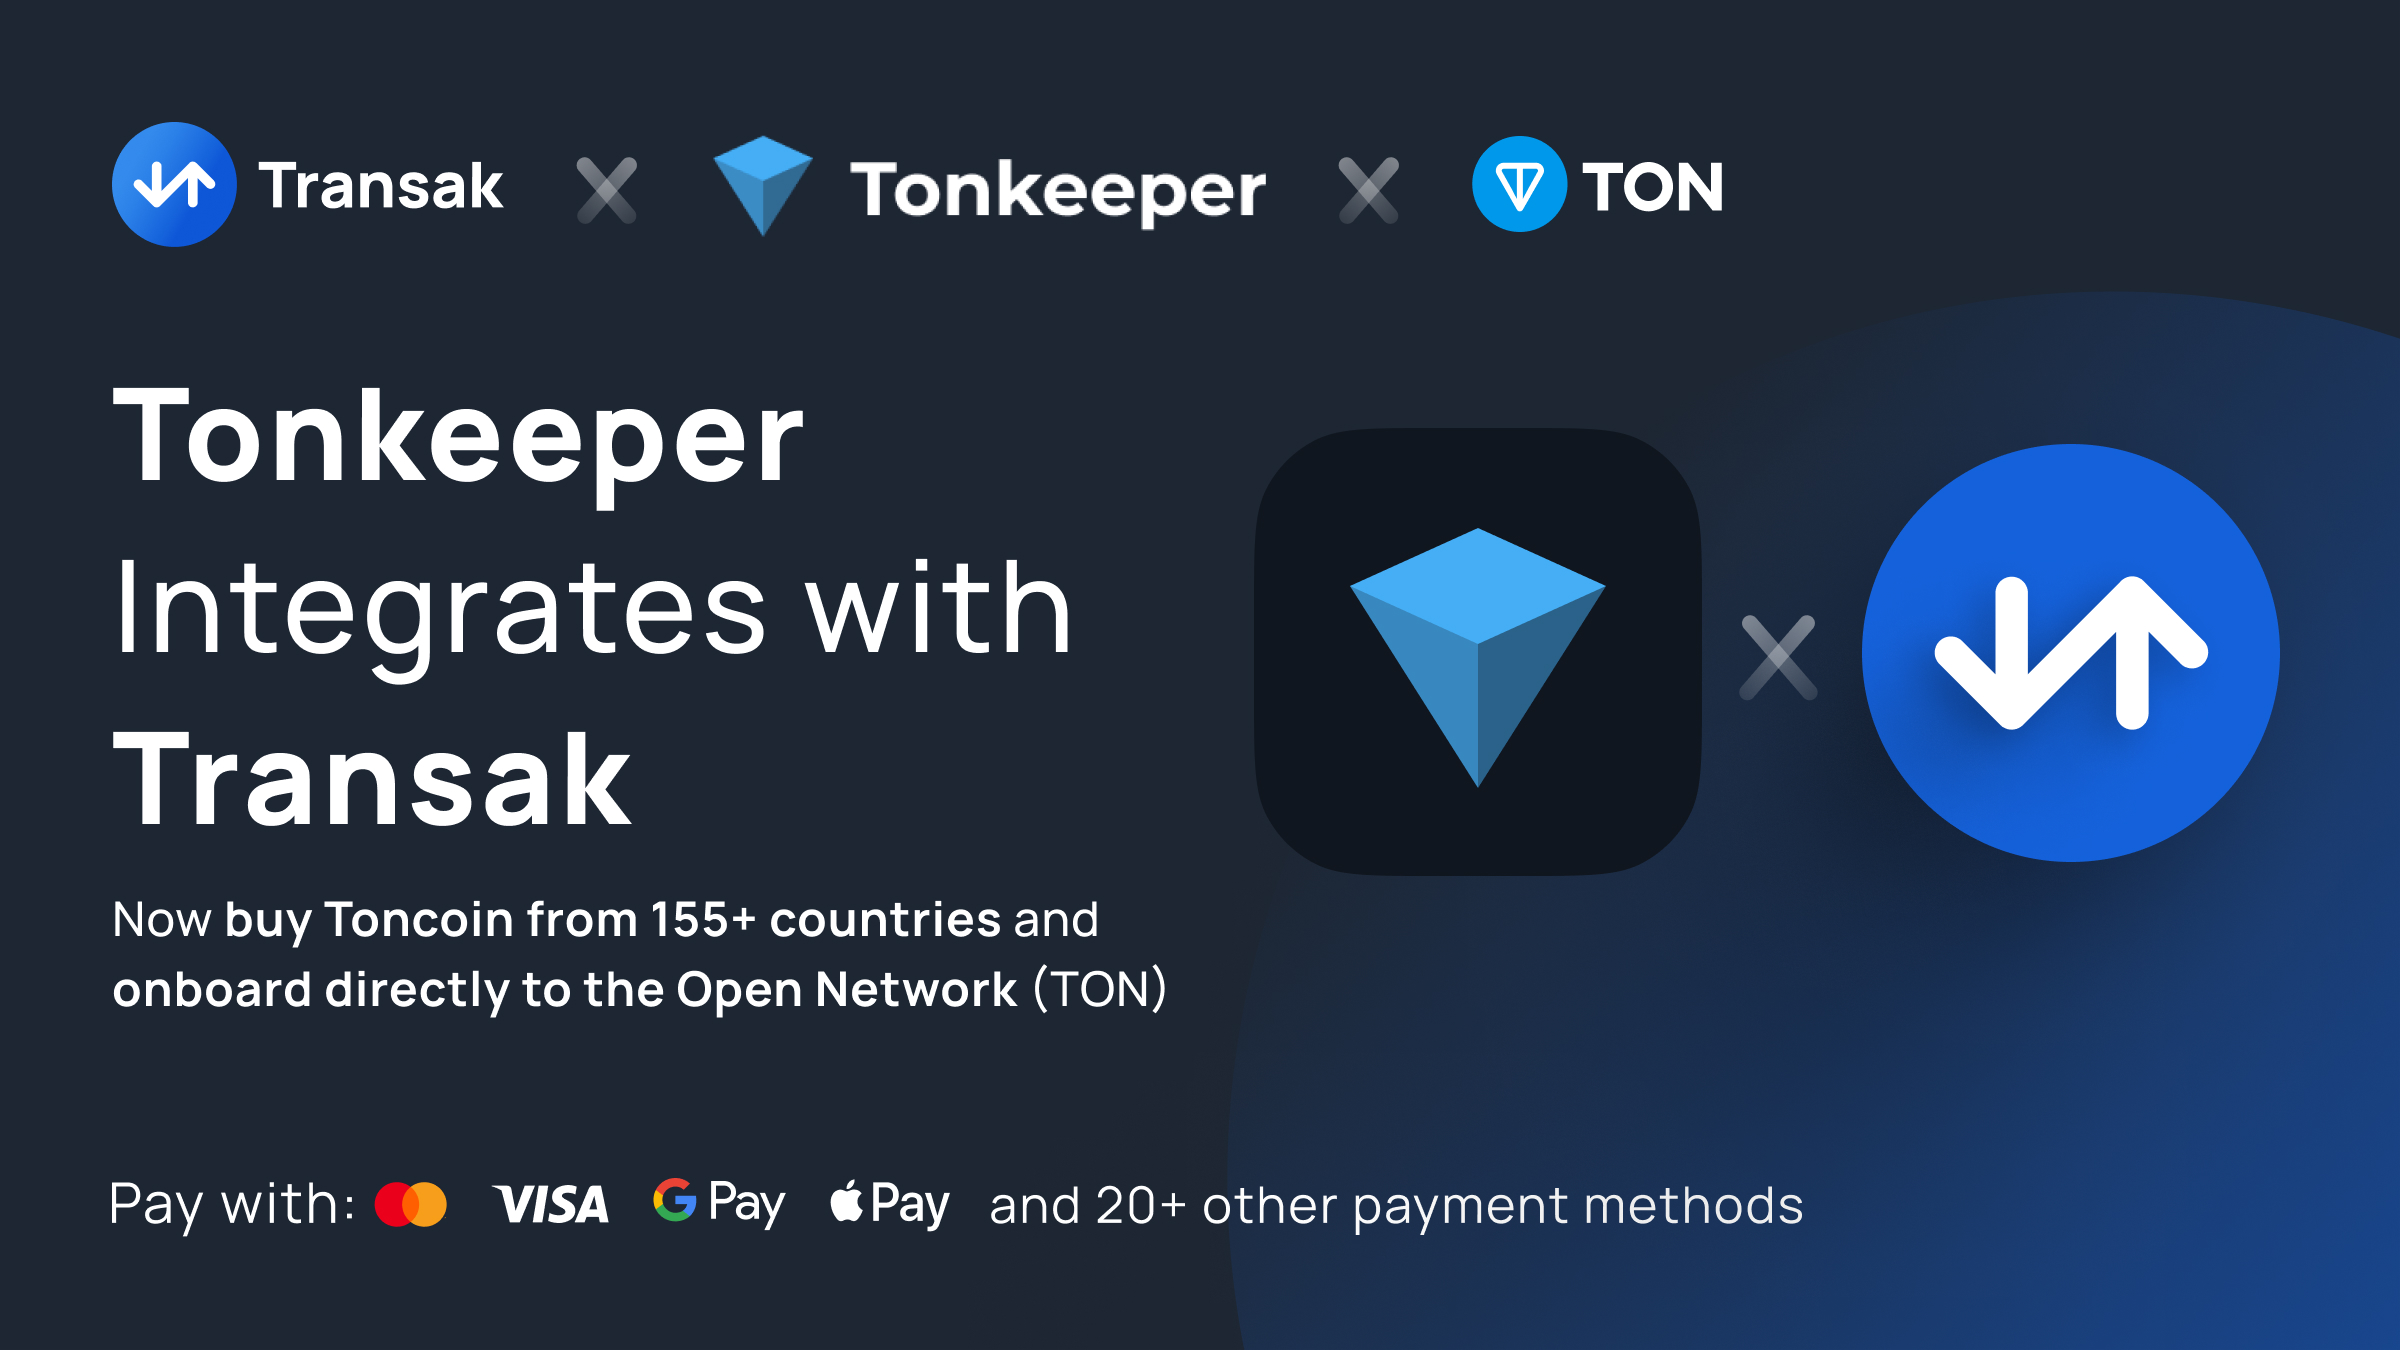 Transak expands into TON ecosystem with its integration on Tonkeeper Wallet